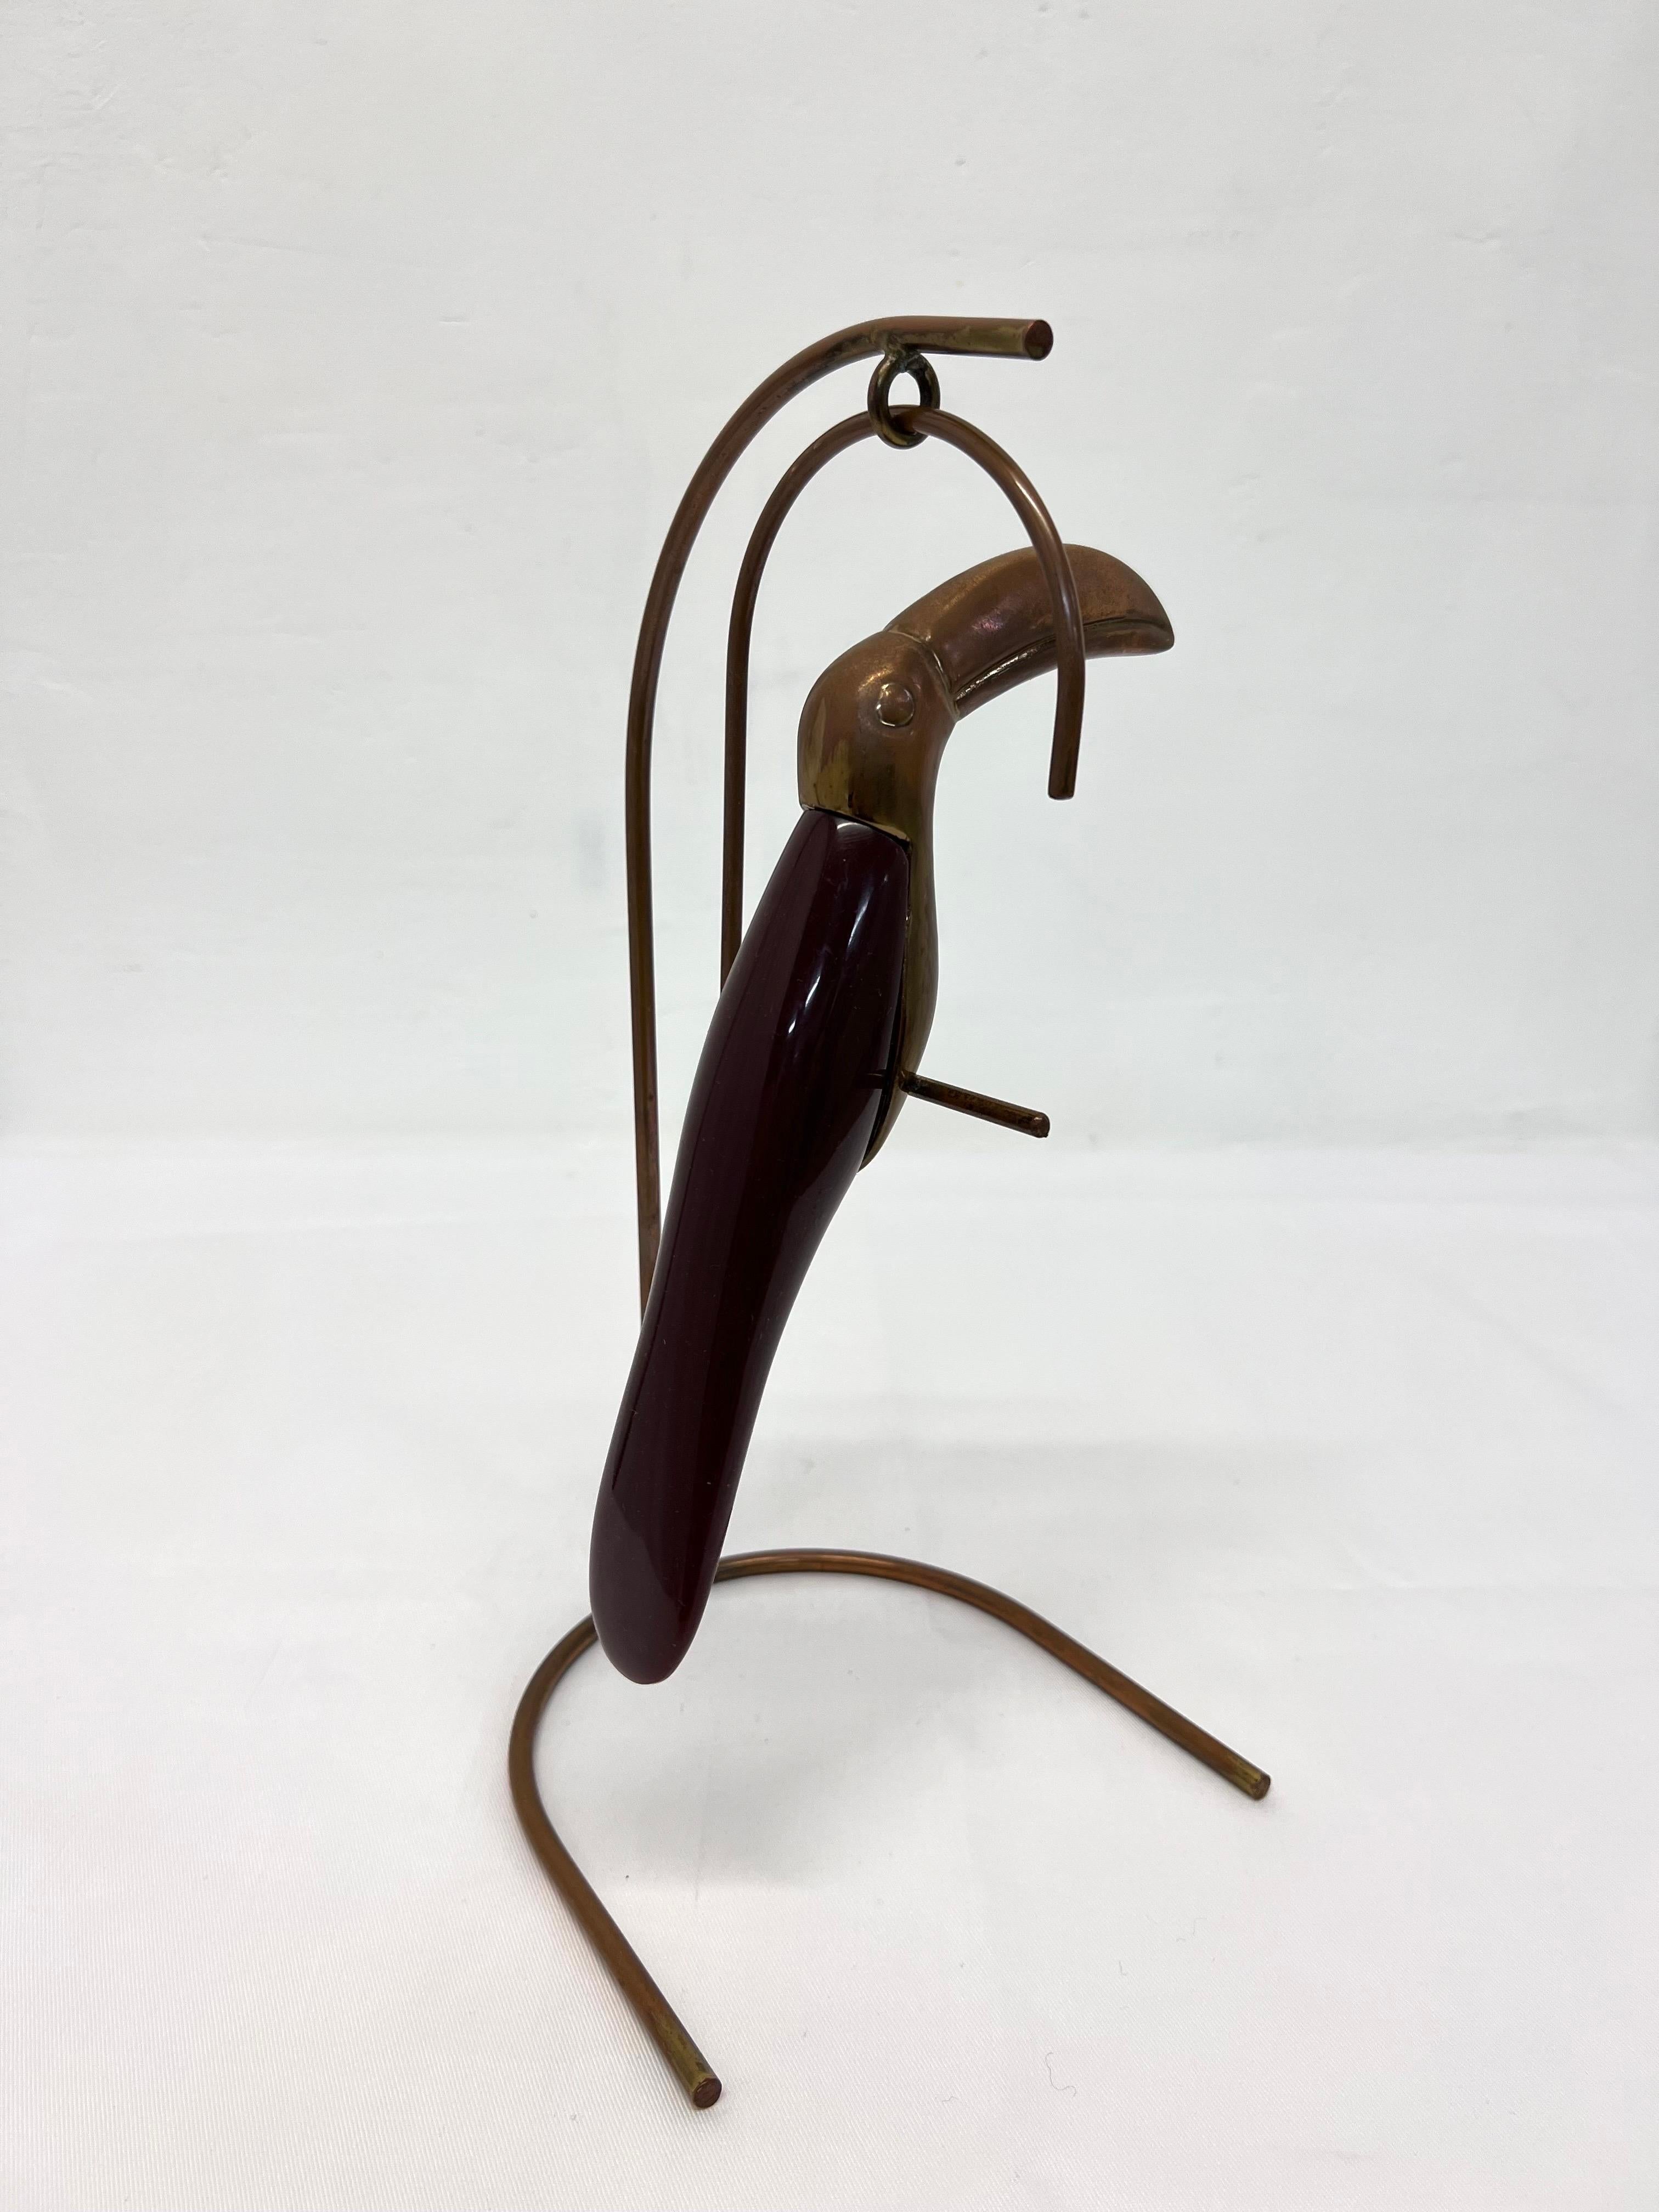 Brazilian Mid-Century Modern Brass and Resin Toucan on Stand, 1960s For Sale 3